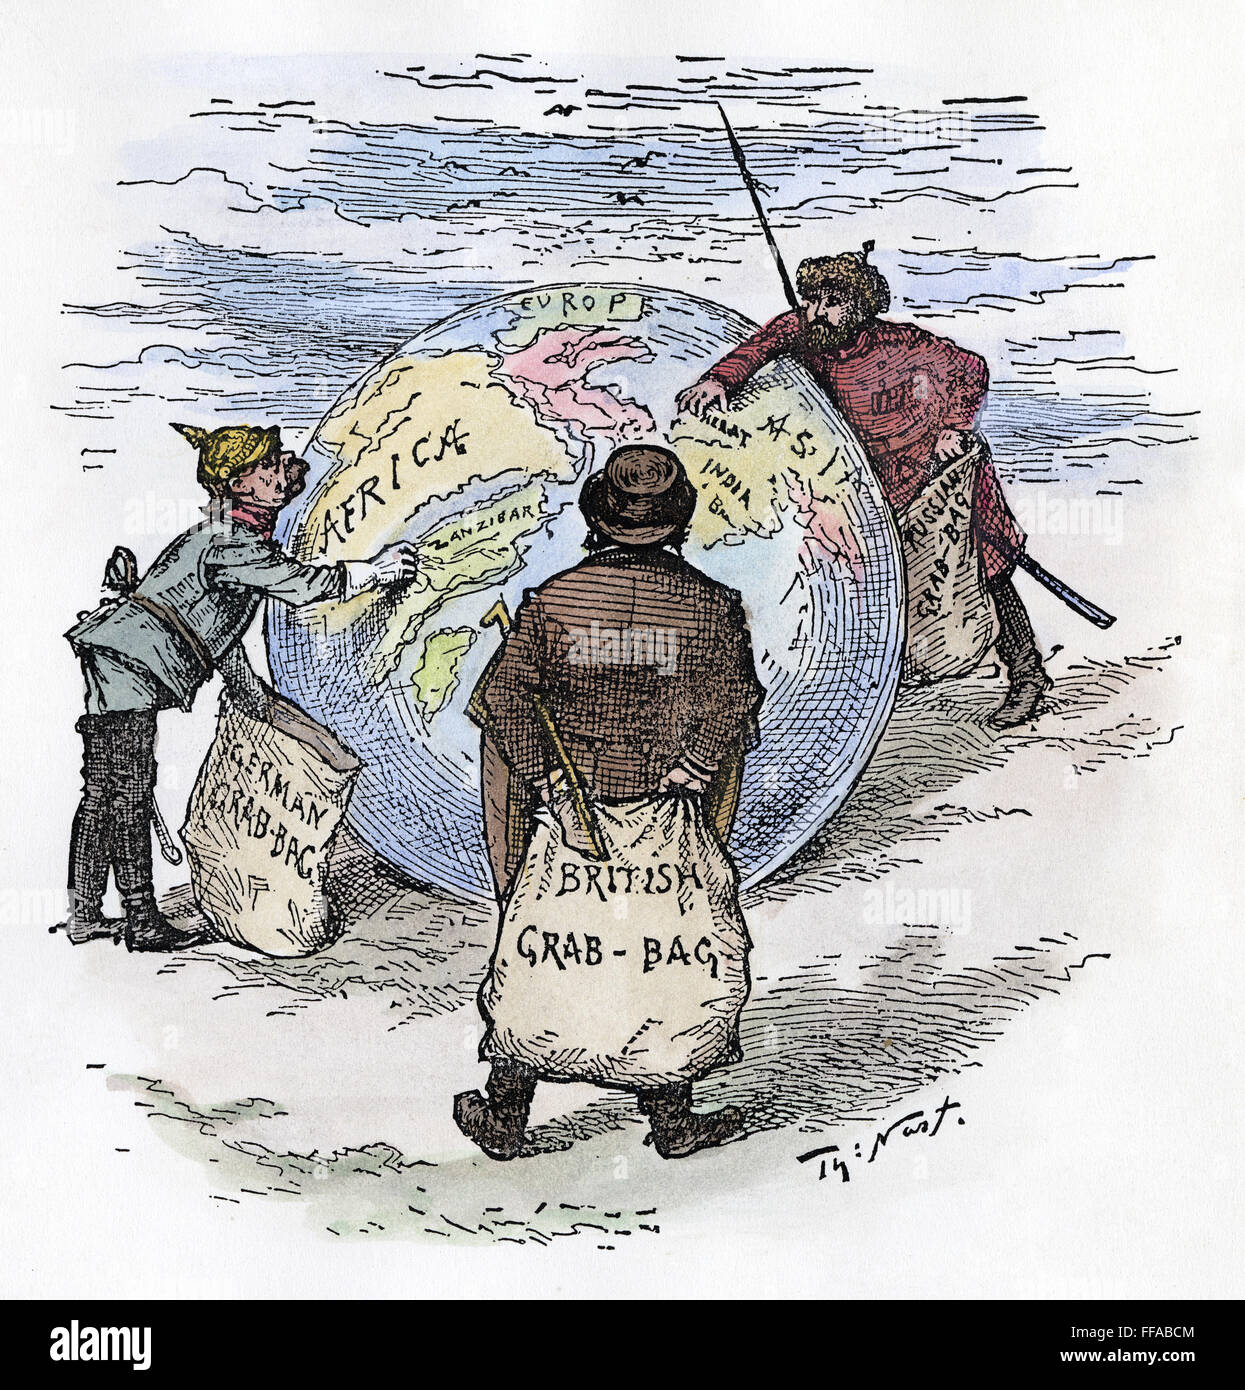 CARTOON: IMPERIALISM, 1885. /nThe World's Plunderers. Germany, England, and Russia grab what they can of Africa and Asia. American cartoon by Thomas Nast, 1885. Stock Photo